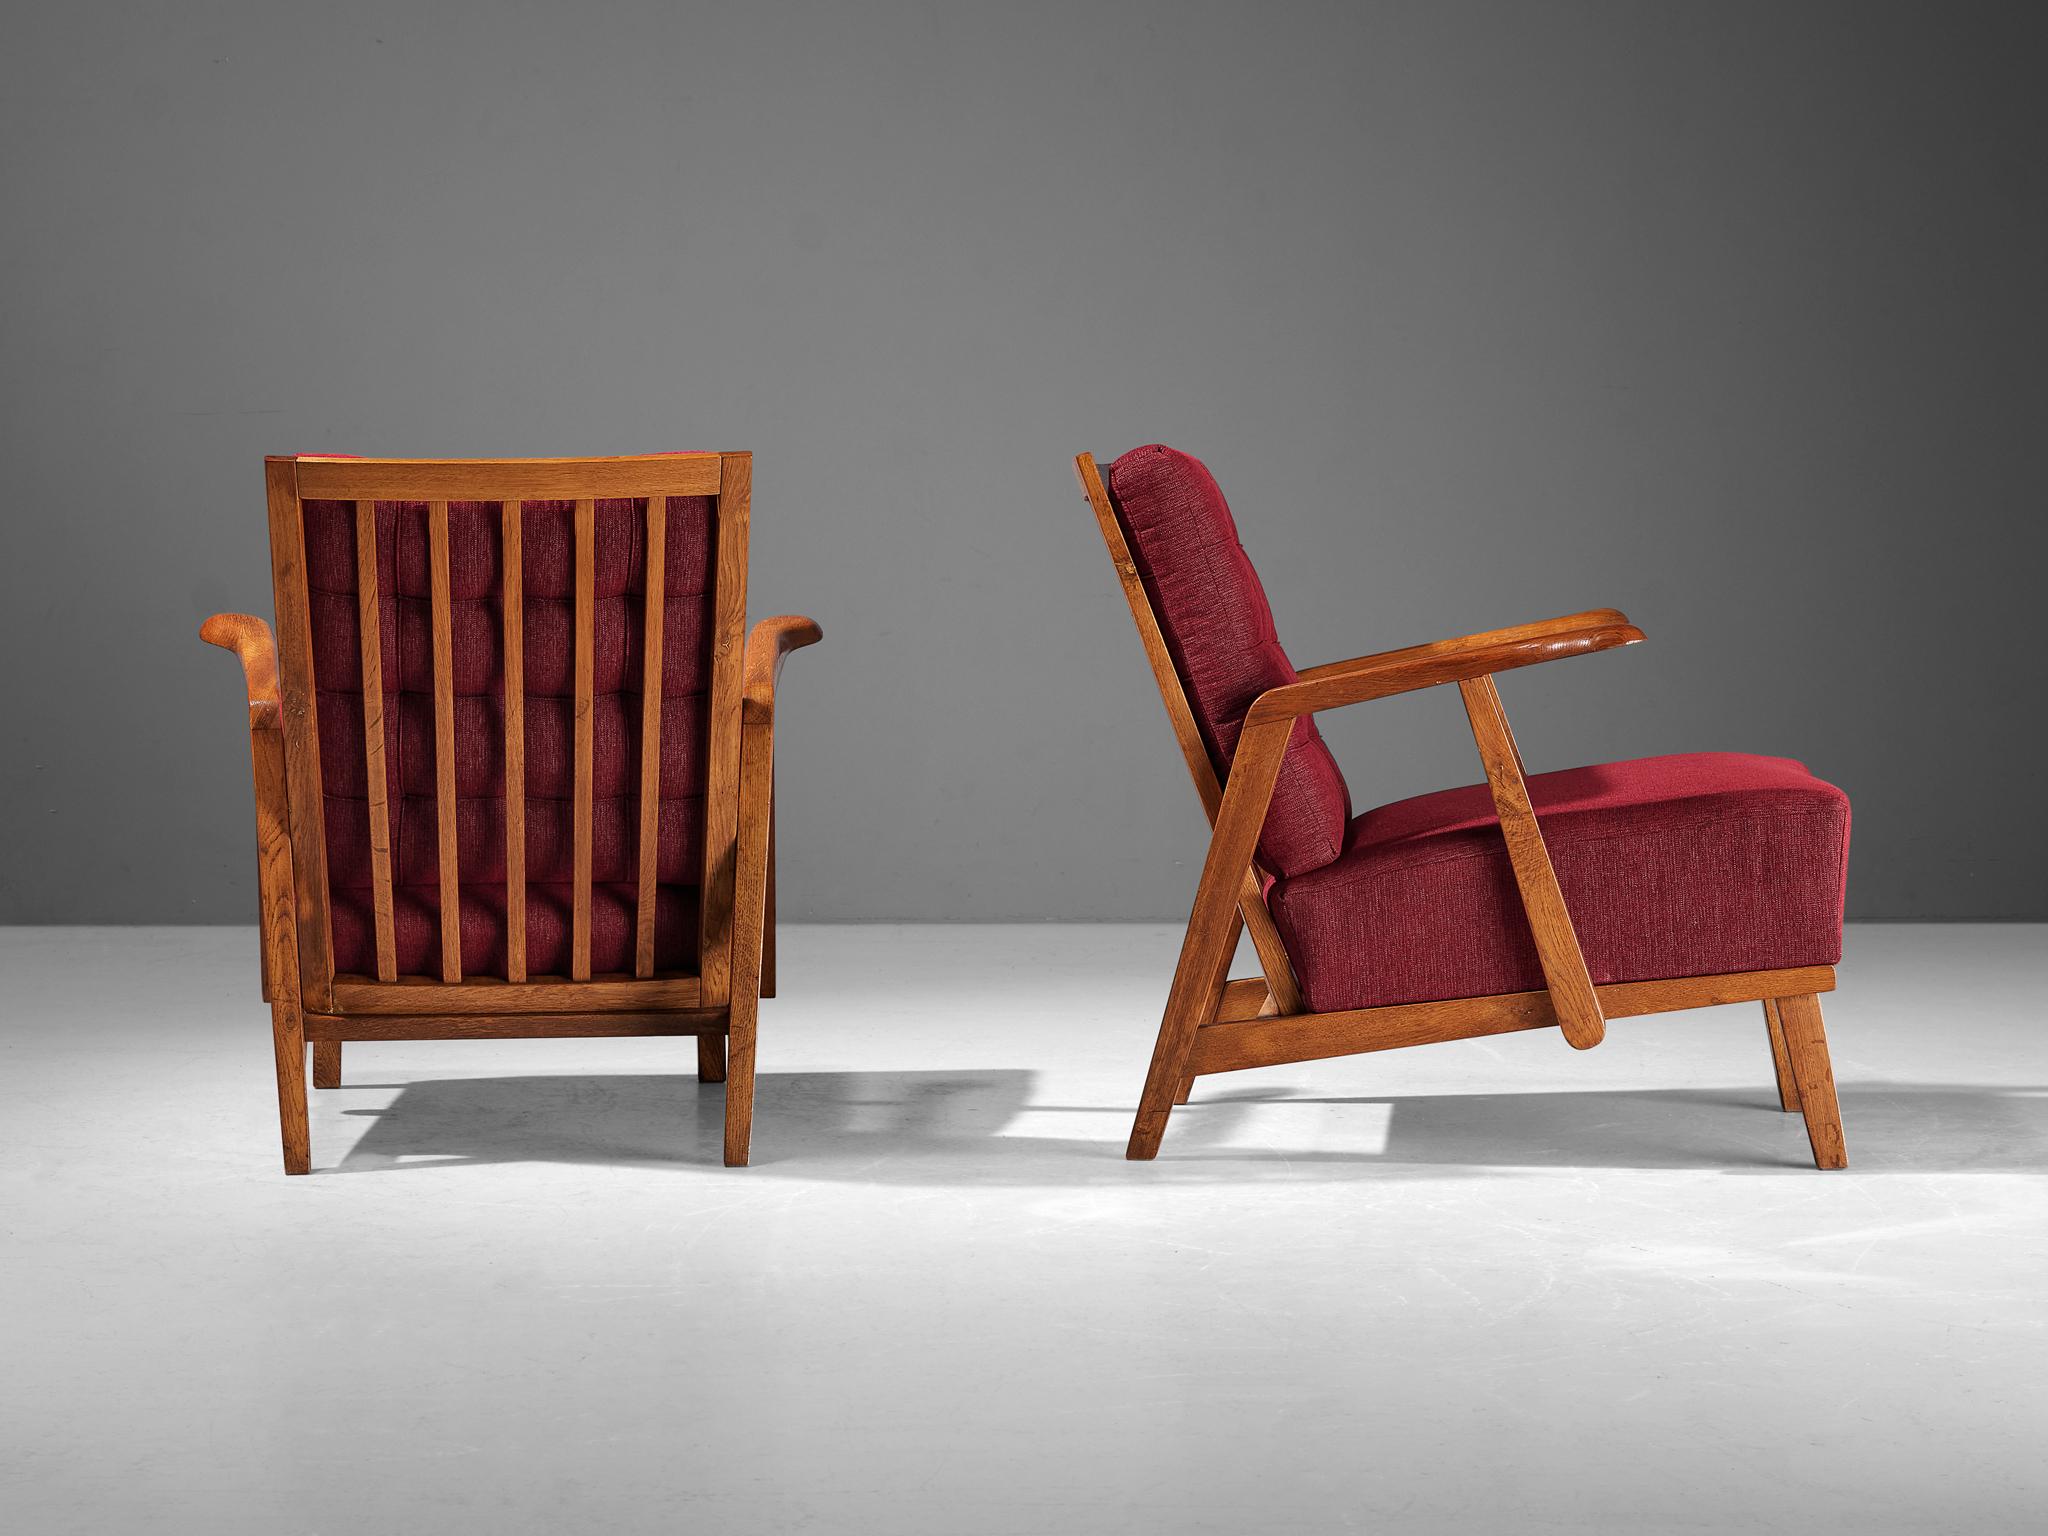 Pair of Lounge Chairs in Oak With Slatted Backs in Red Upholstery  1